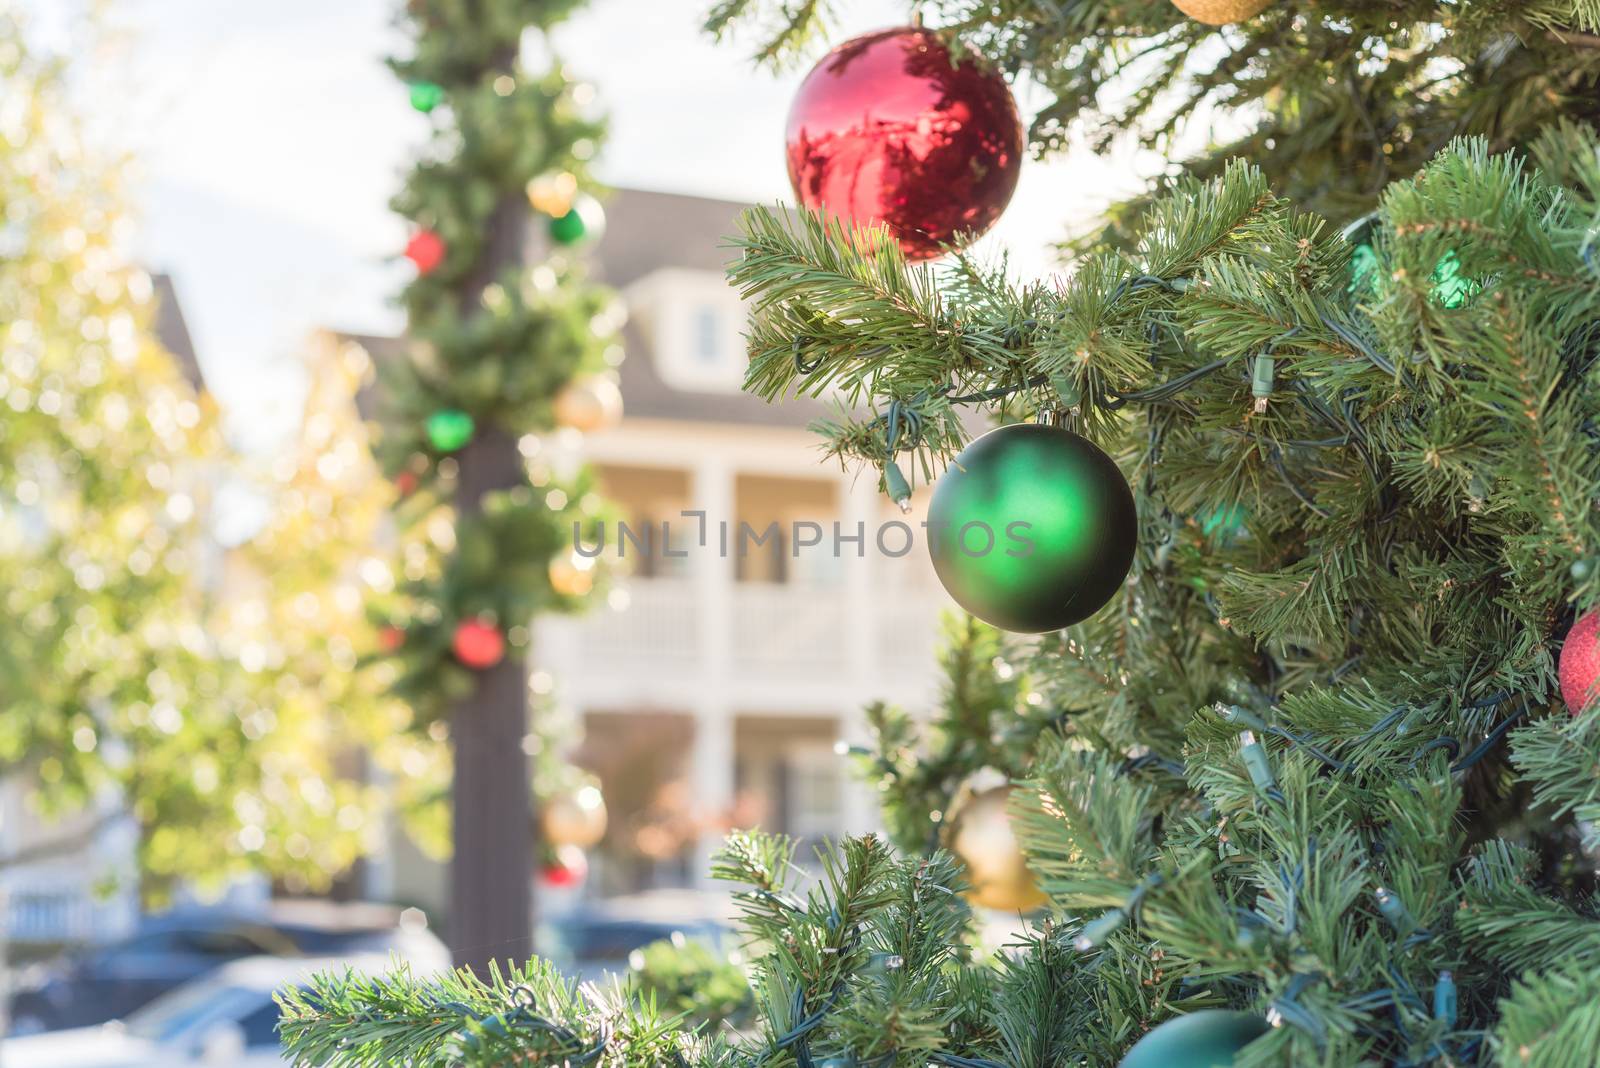 Beautiful Christmas ball hanging on pine branches at daytime light with two-story residential house in background. Baubles and spruce tree. Traditional artificial Xmas ornament near Dallas, Texas